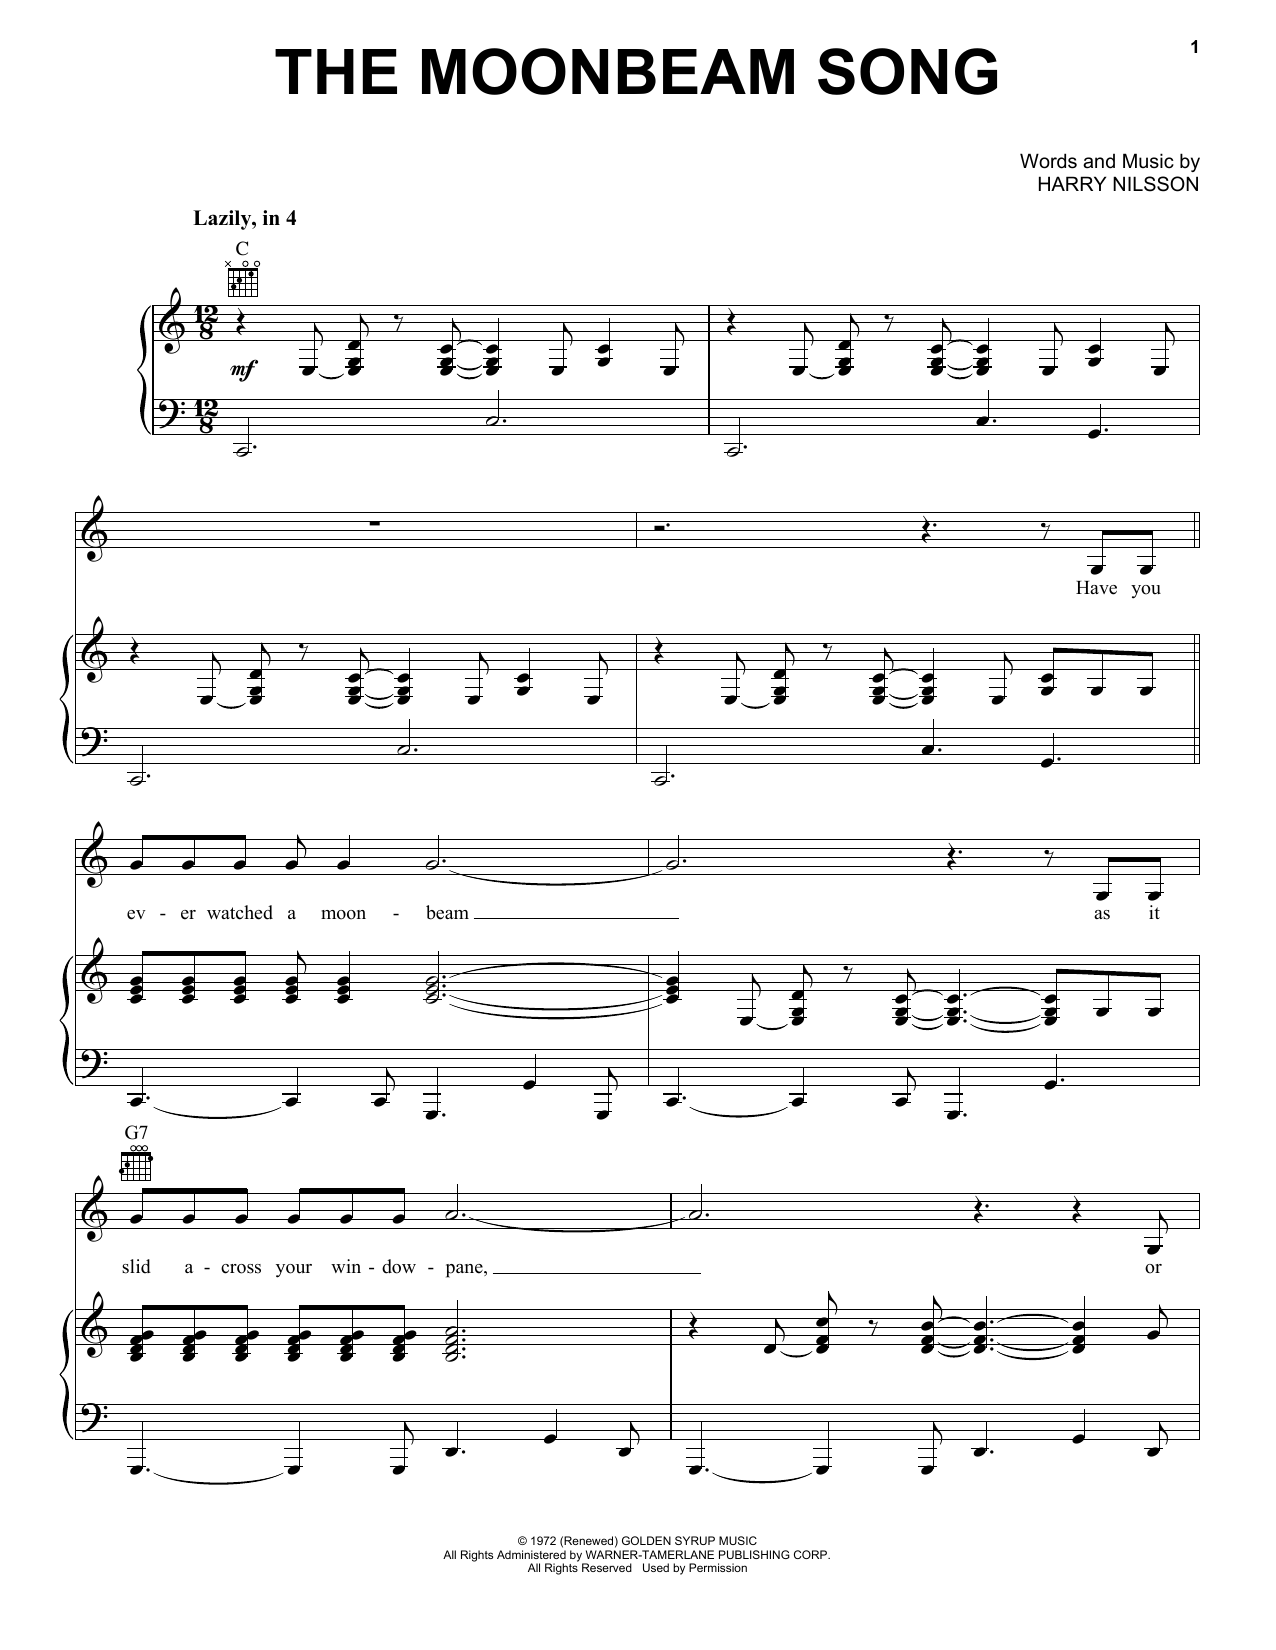 Download Harry Nilsson The Moonbeam Song Sheet Music